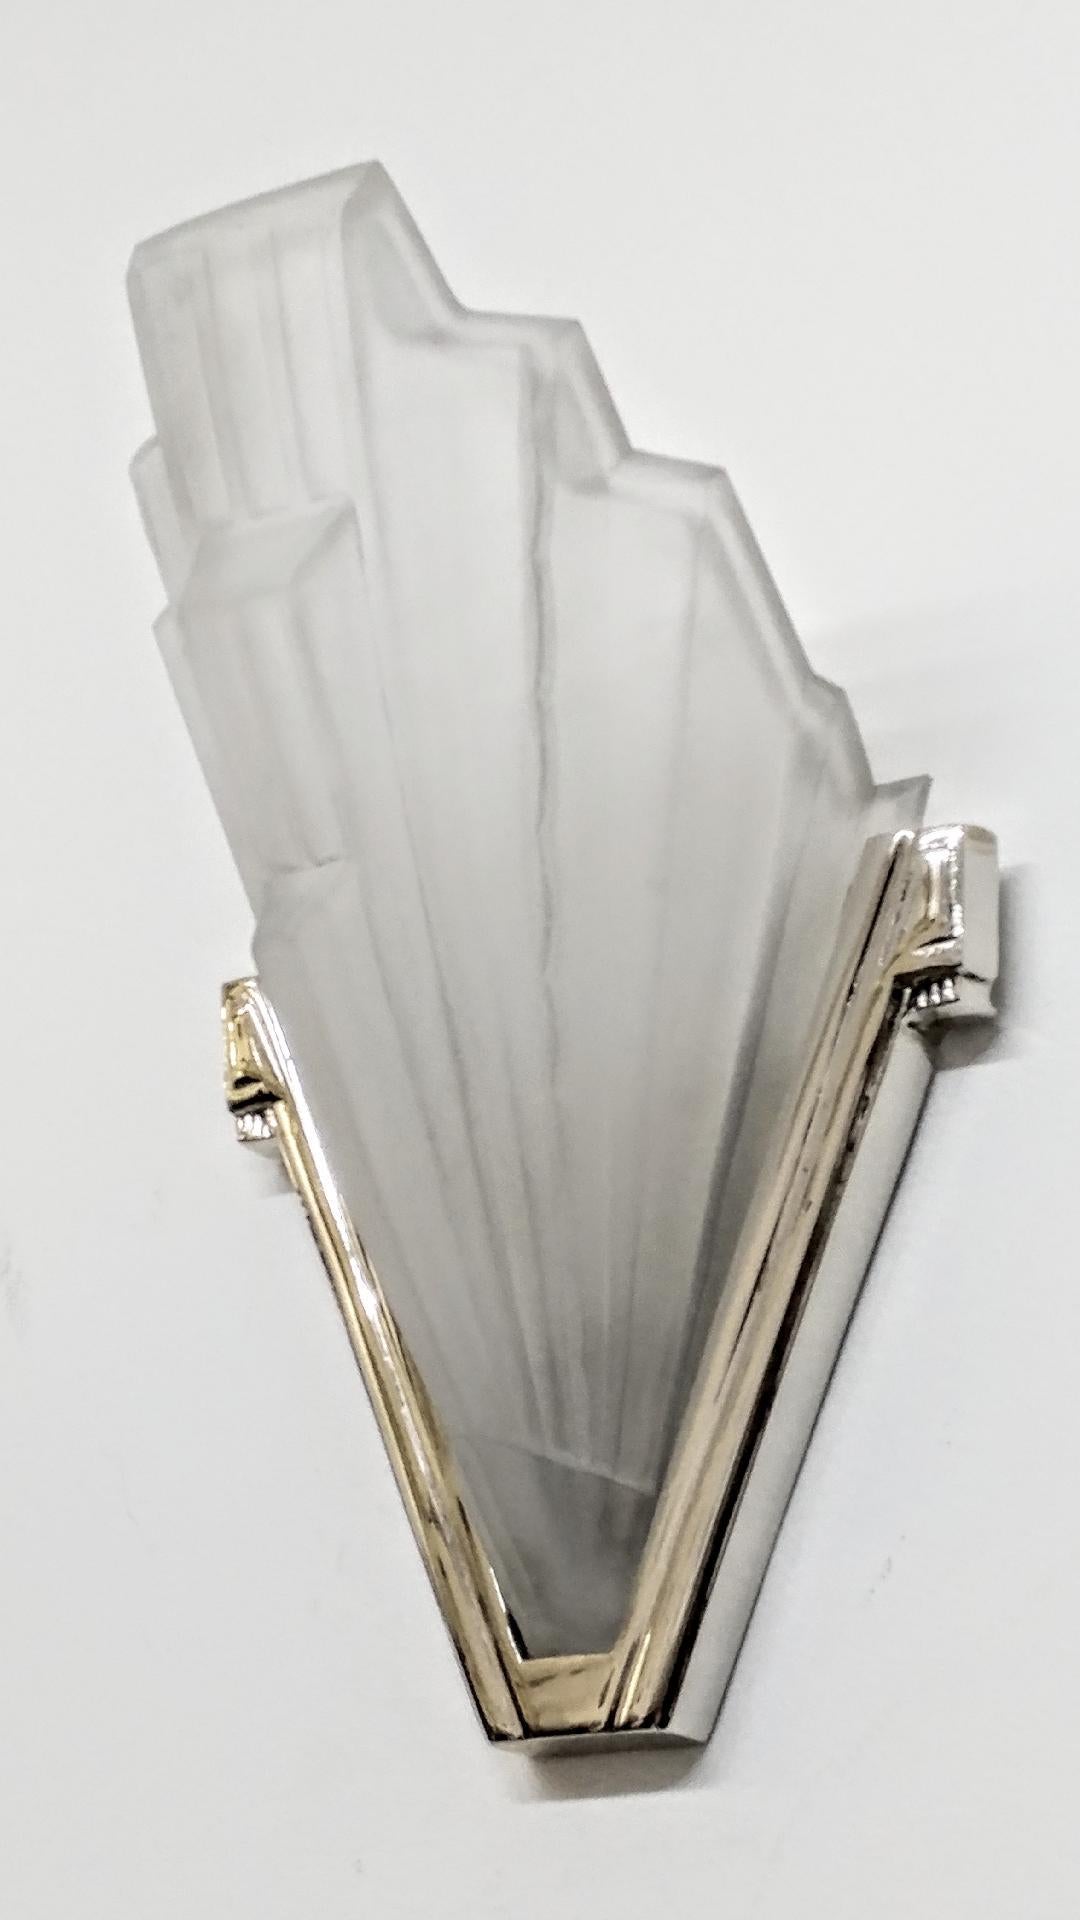 A stunning pair of French Art Deco sconces by the French artist “Sabino“ in great condition. Clear and frosted molded glass shades with Skyscraper geometric motif. Held by polished details mounted in nickeled bronze design frames. Replated in nickel